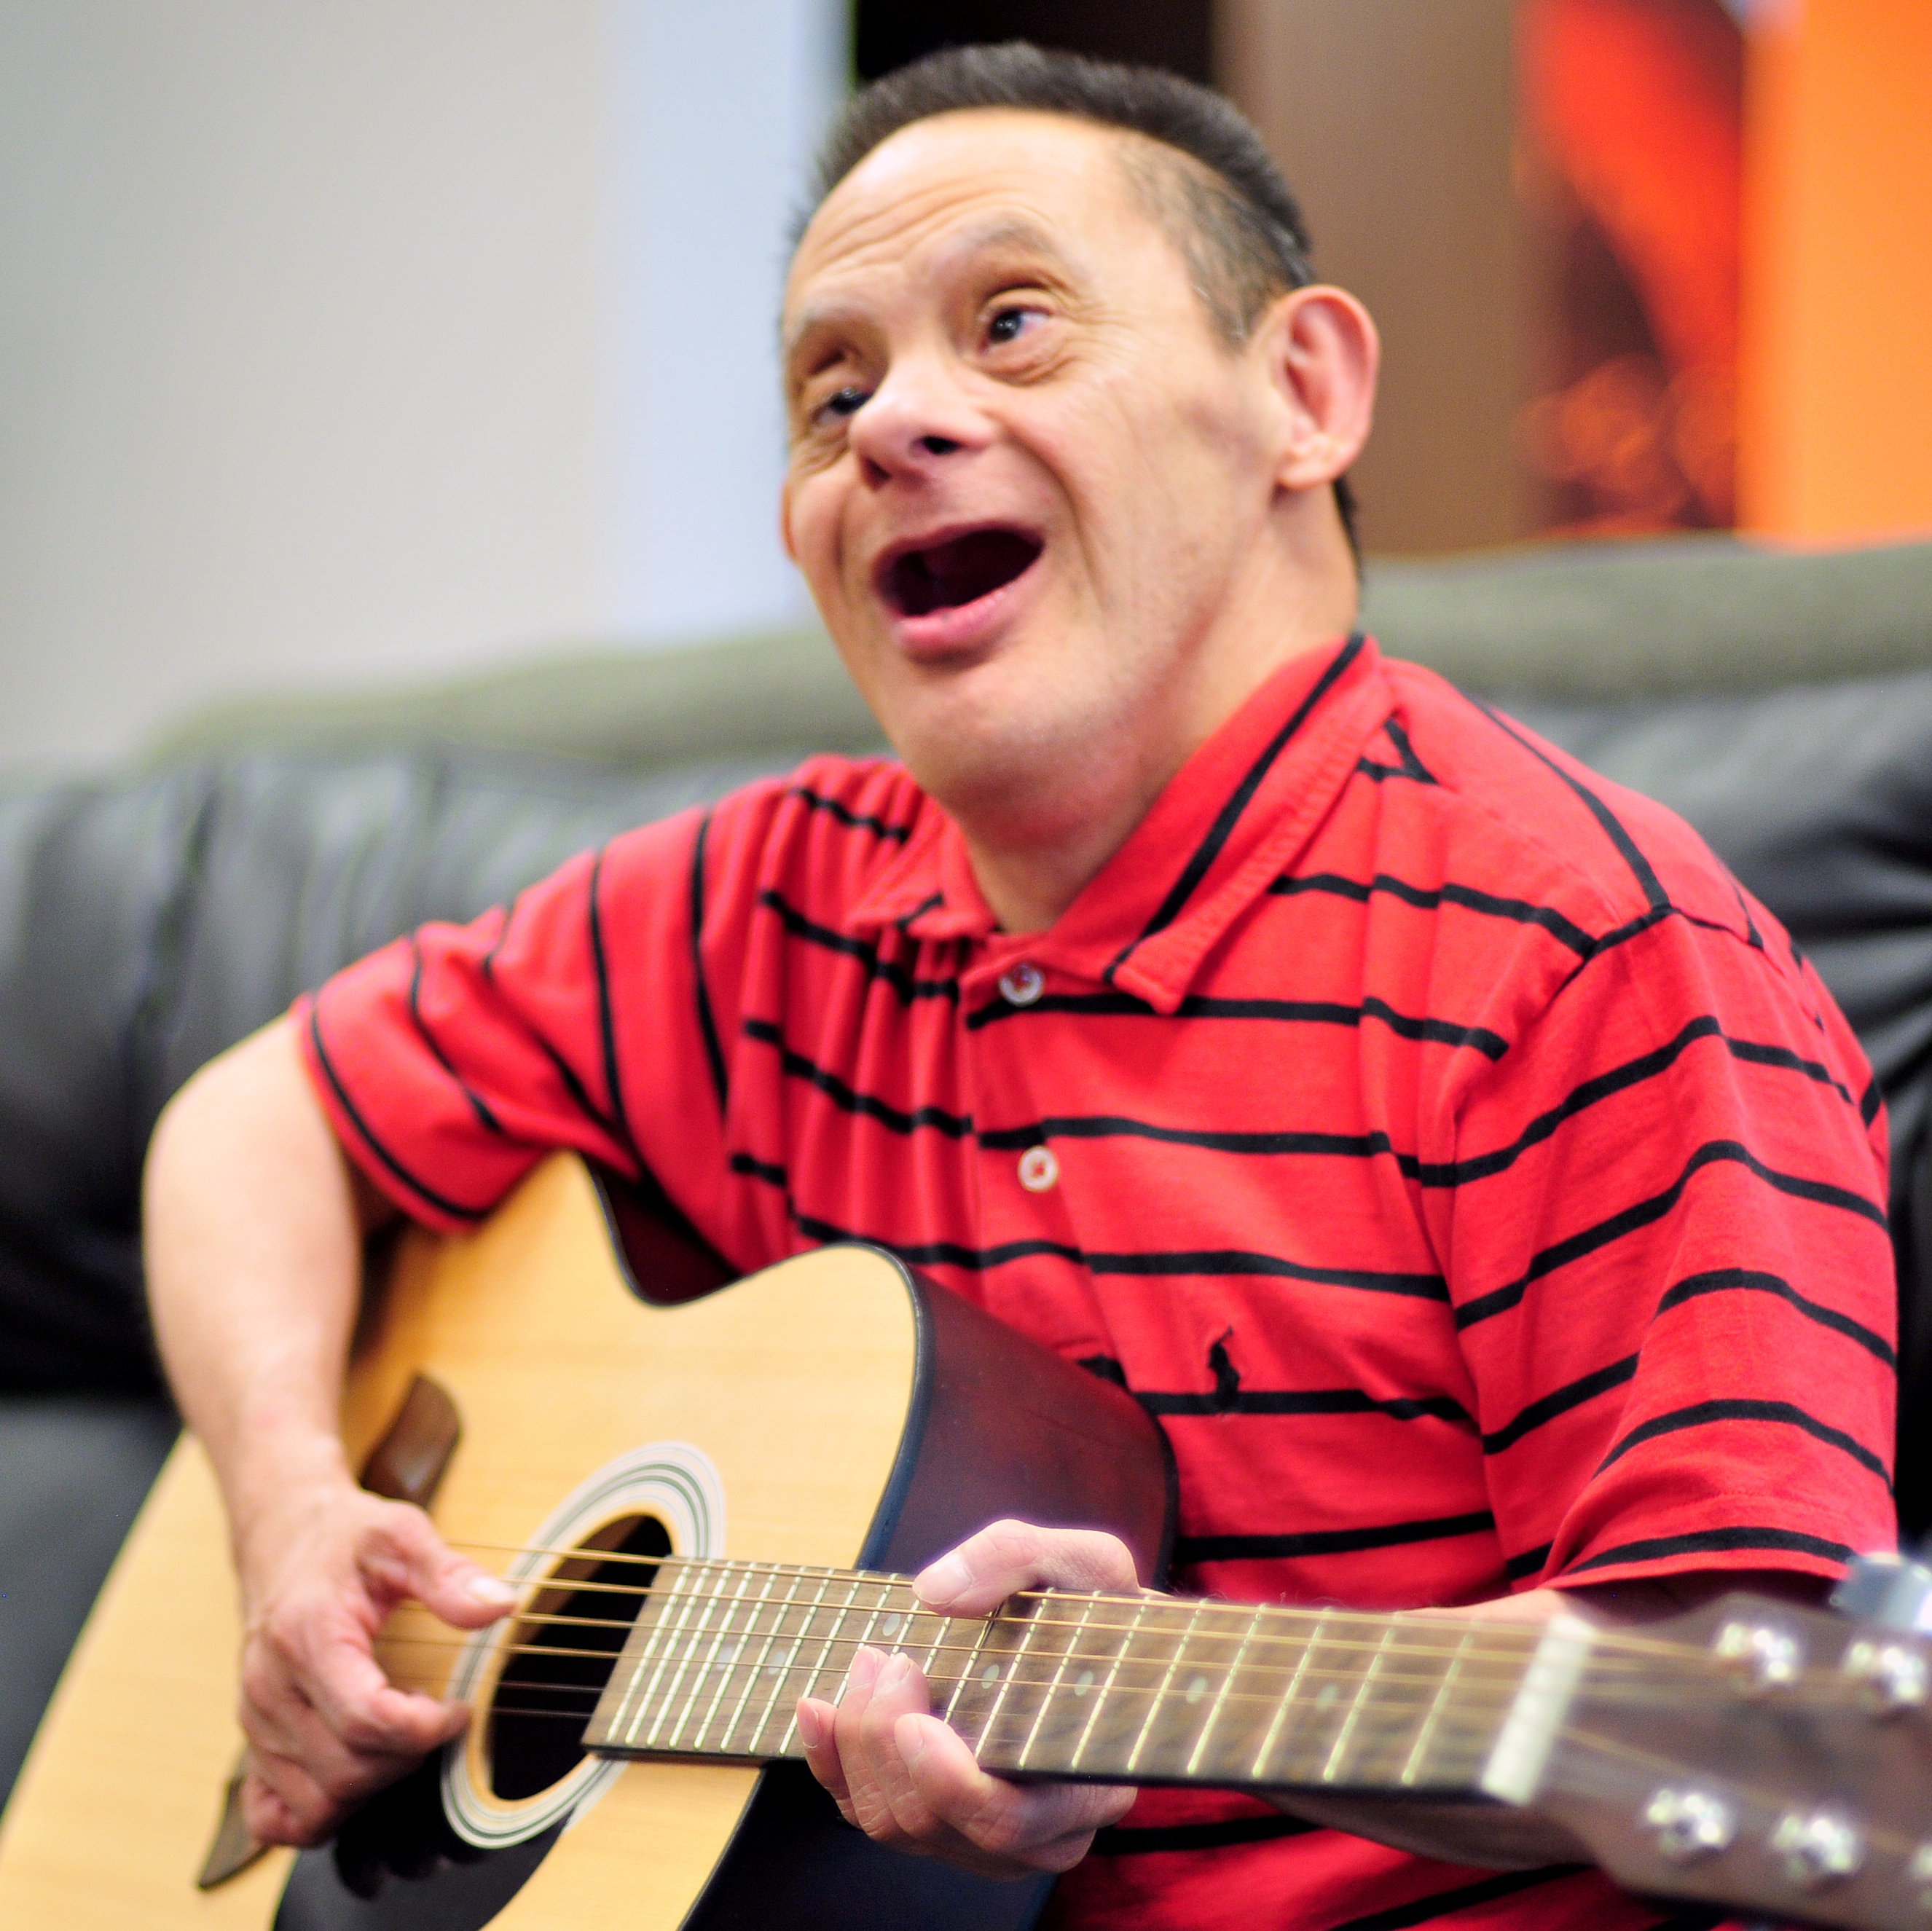 Man in red striped shirt playing guitar and singin